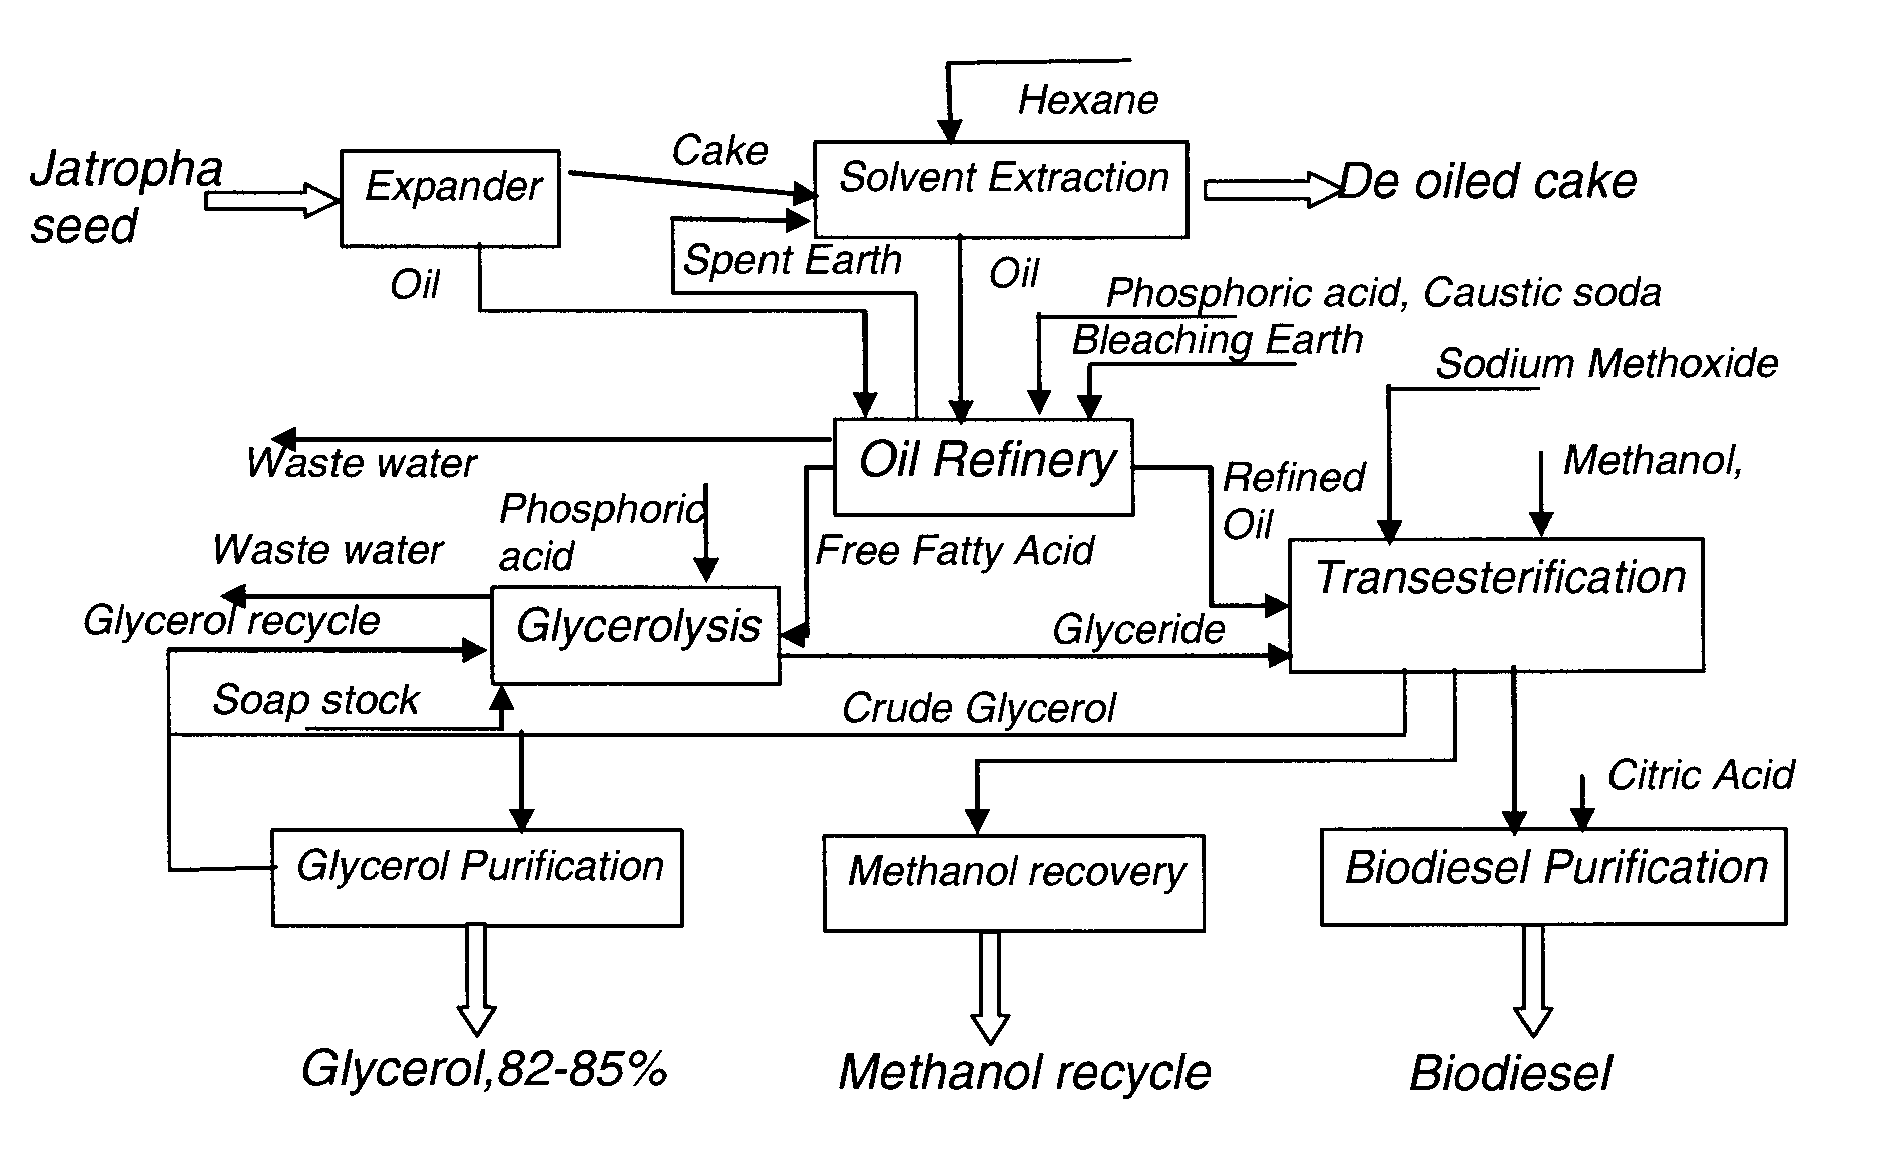 Integrated Process for the Preparation of Fatty Acid Methyl Ester (Biodiesel)